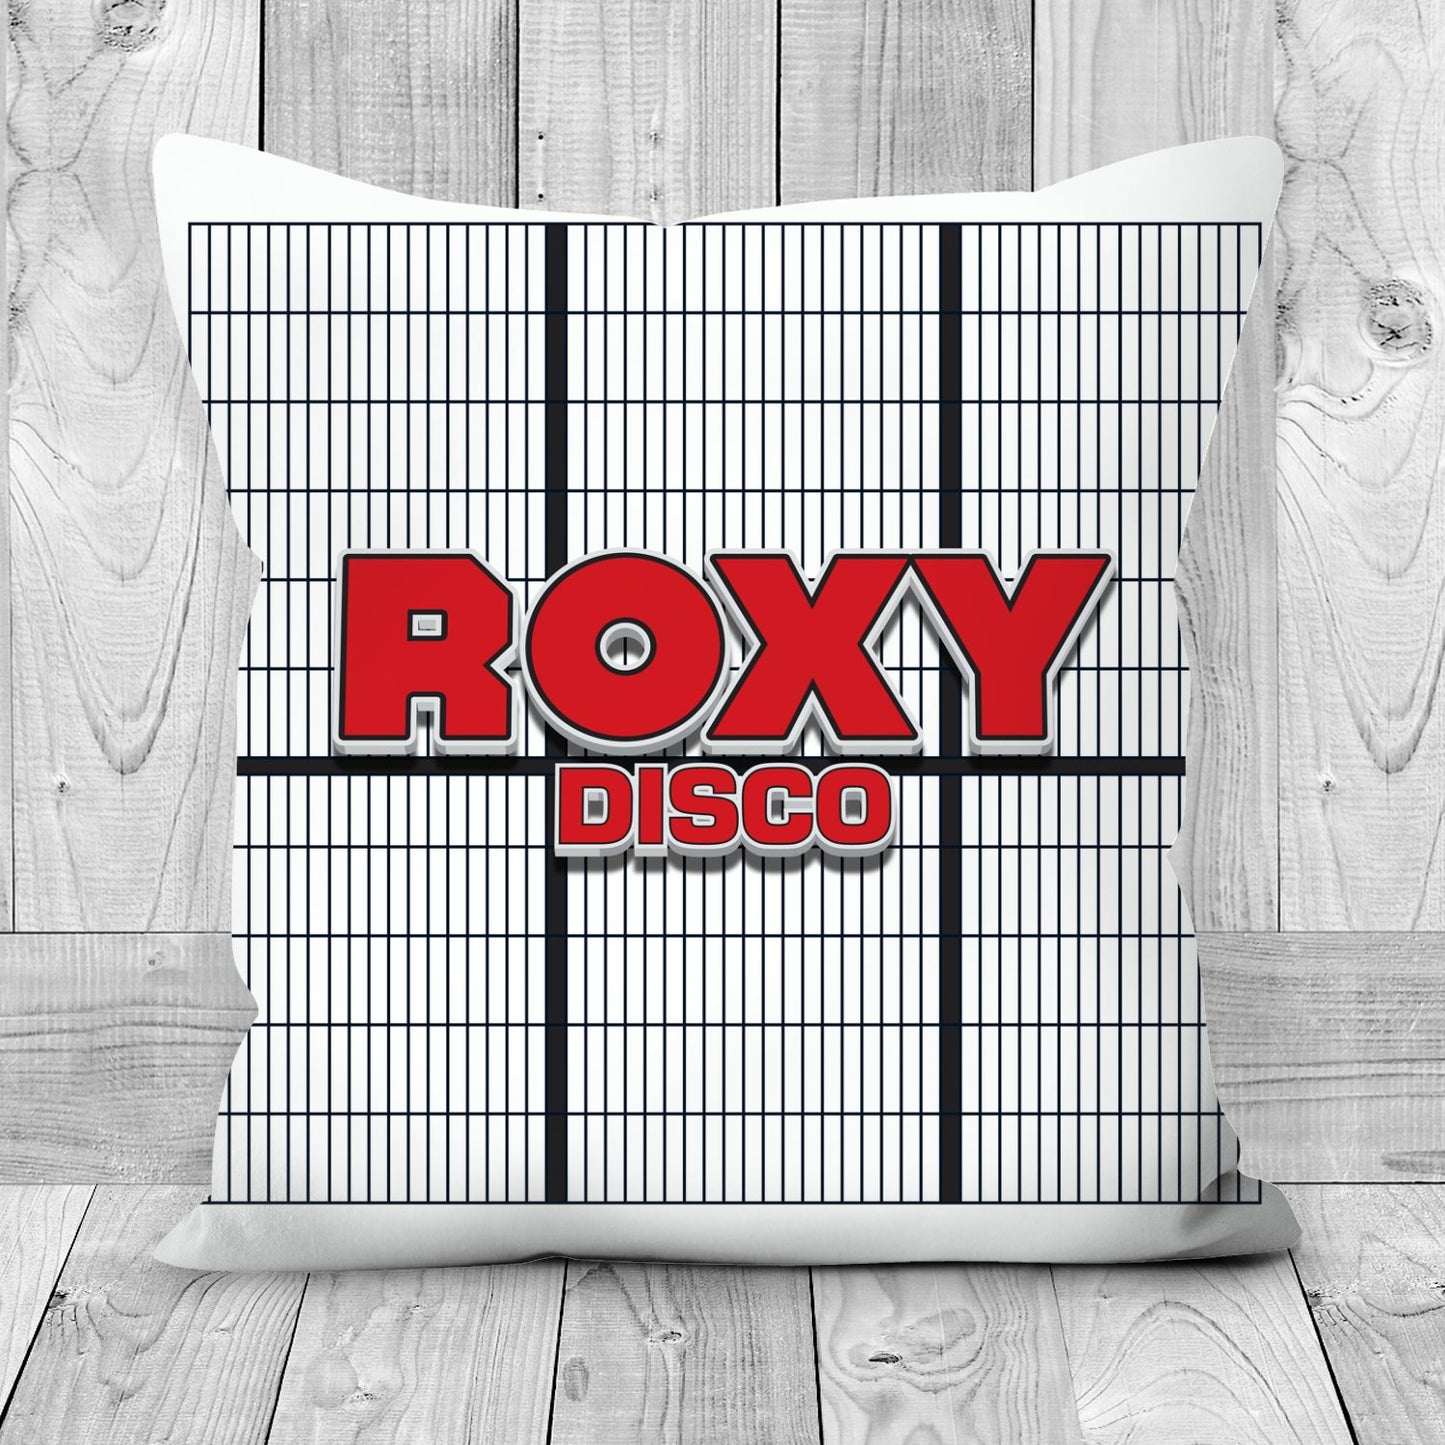 Roxy - handmade cushion - Dirty Stop Outs